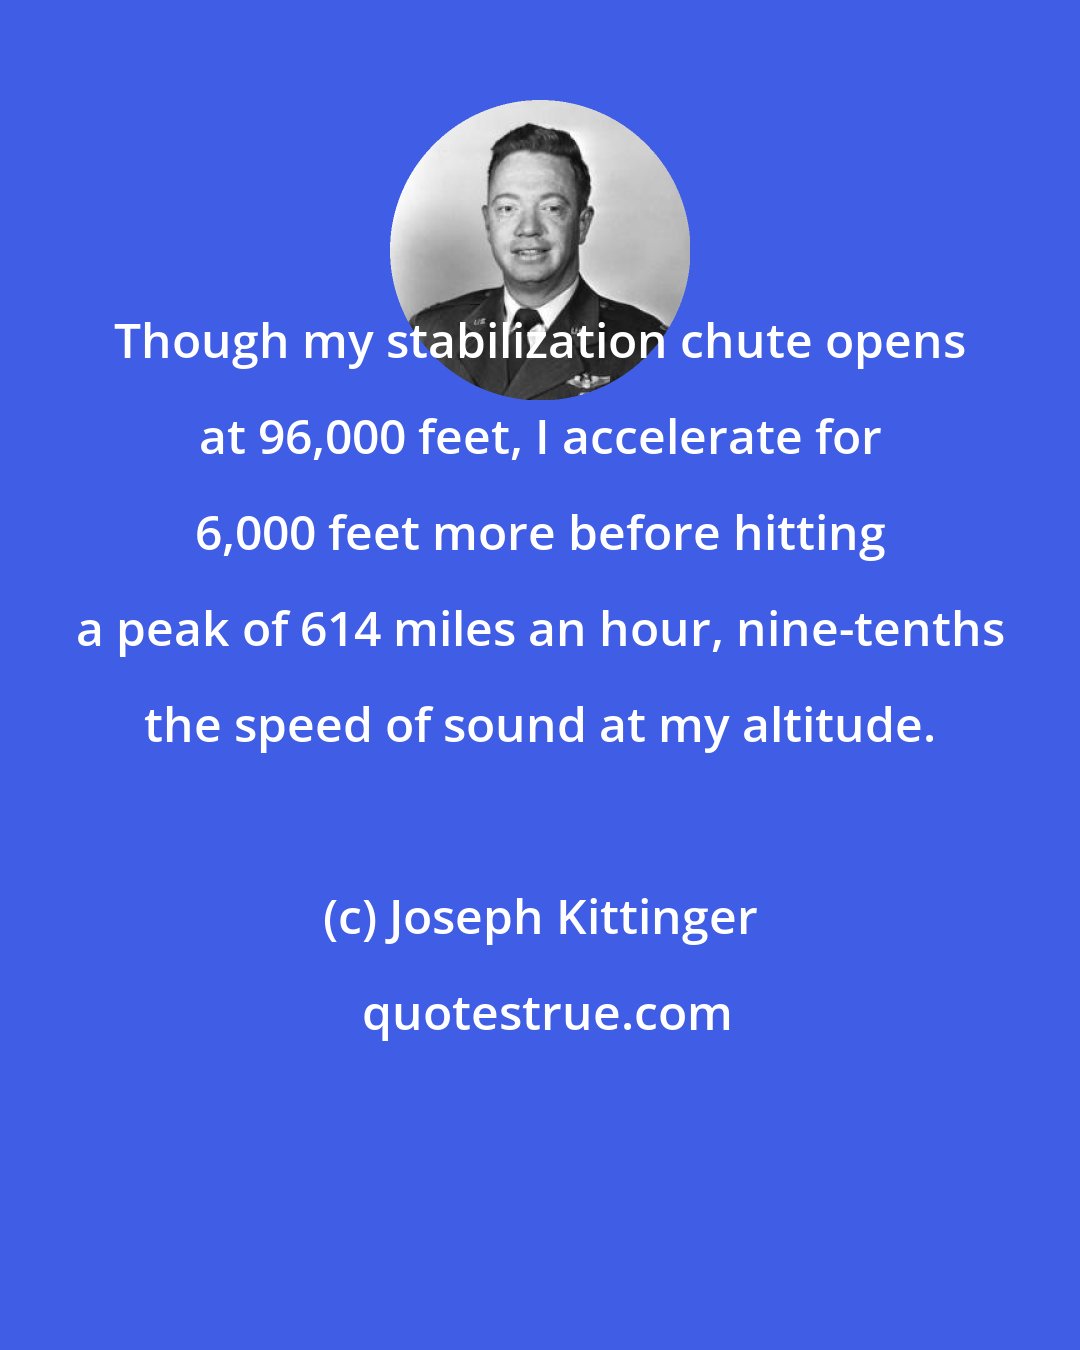 Joseph Kittinger: Though my stabilization chute opens at 96,000 feet, I accelerate for 6,000 feet more before hitting a peak of 614 miles an hour, nine-tenths the speed of sound at my altitude.